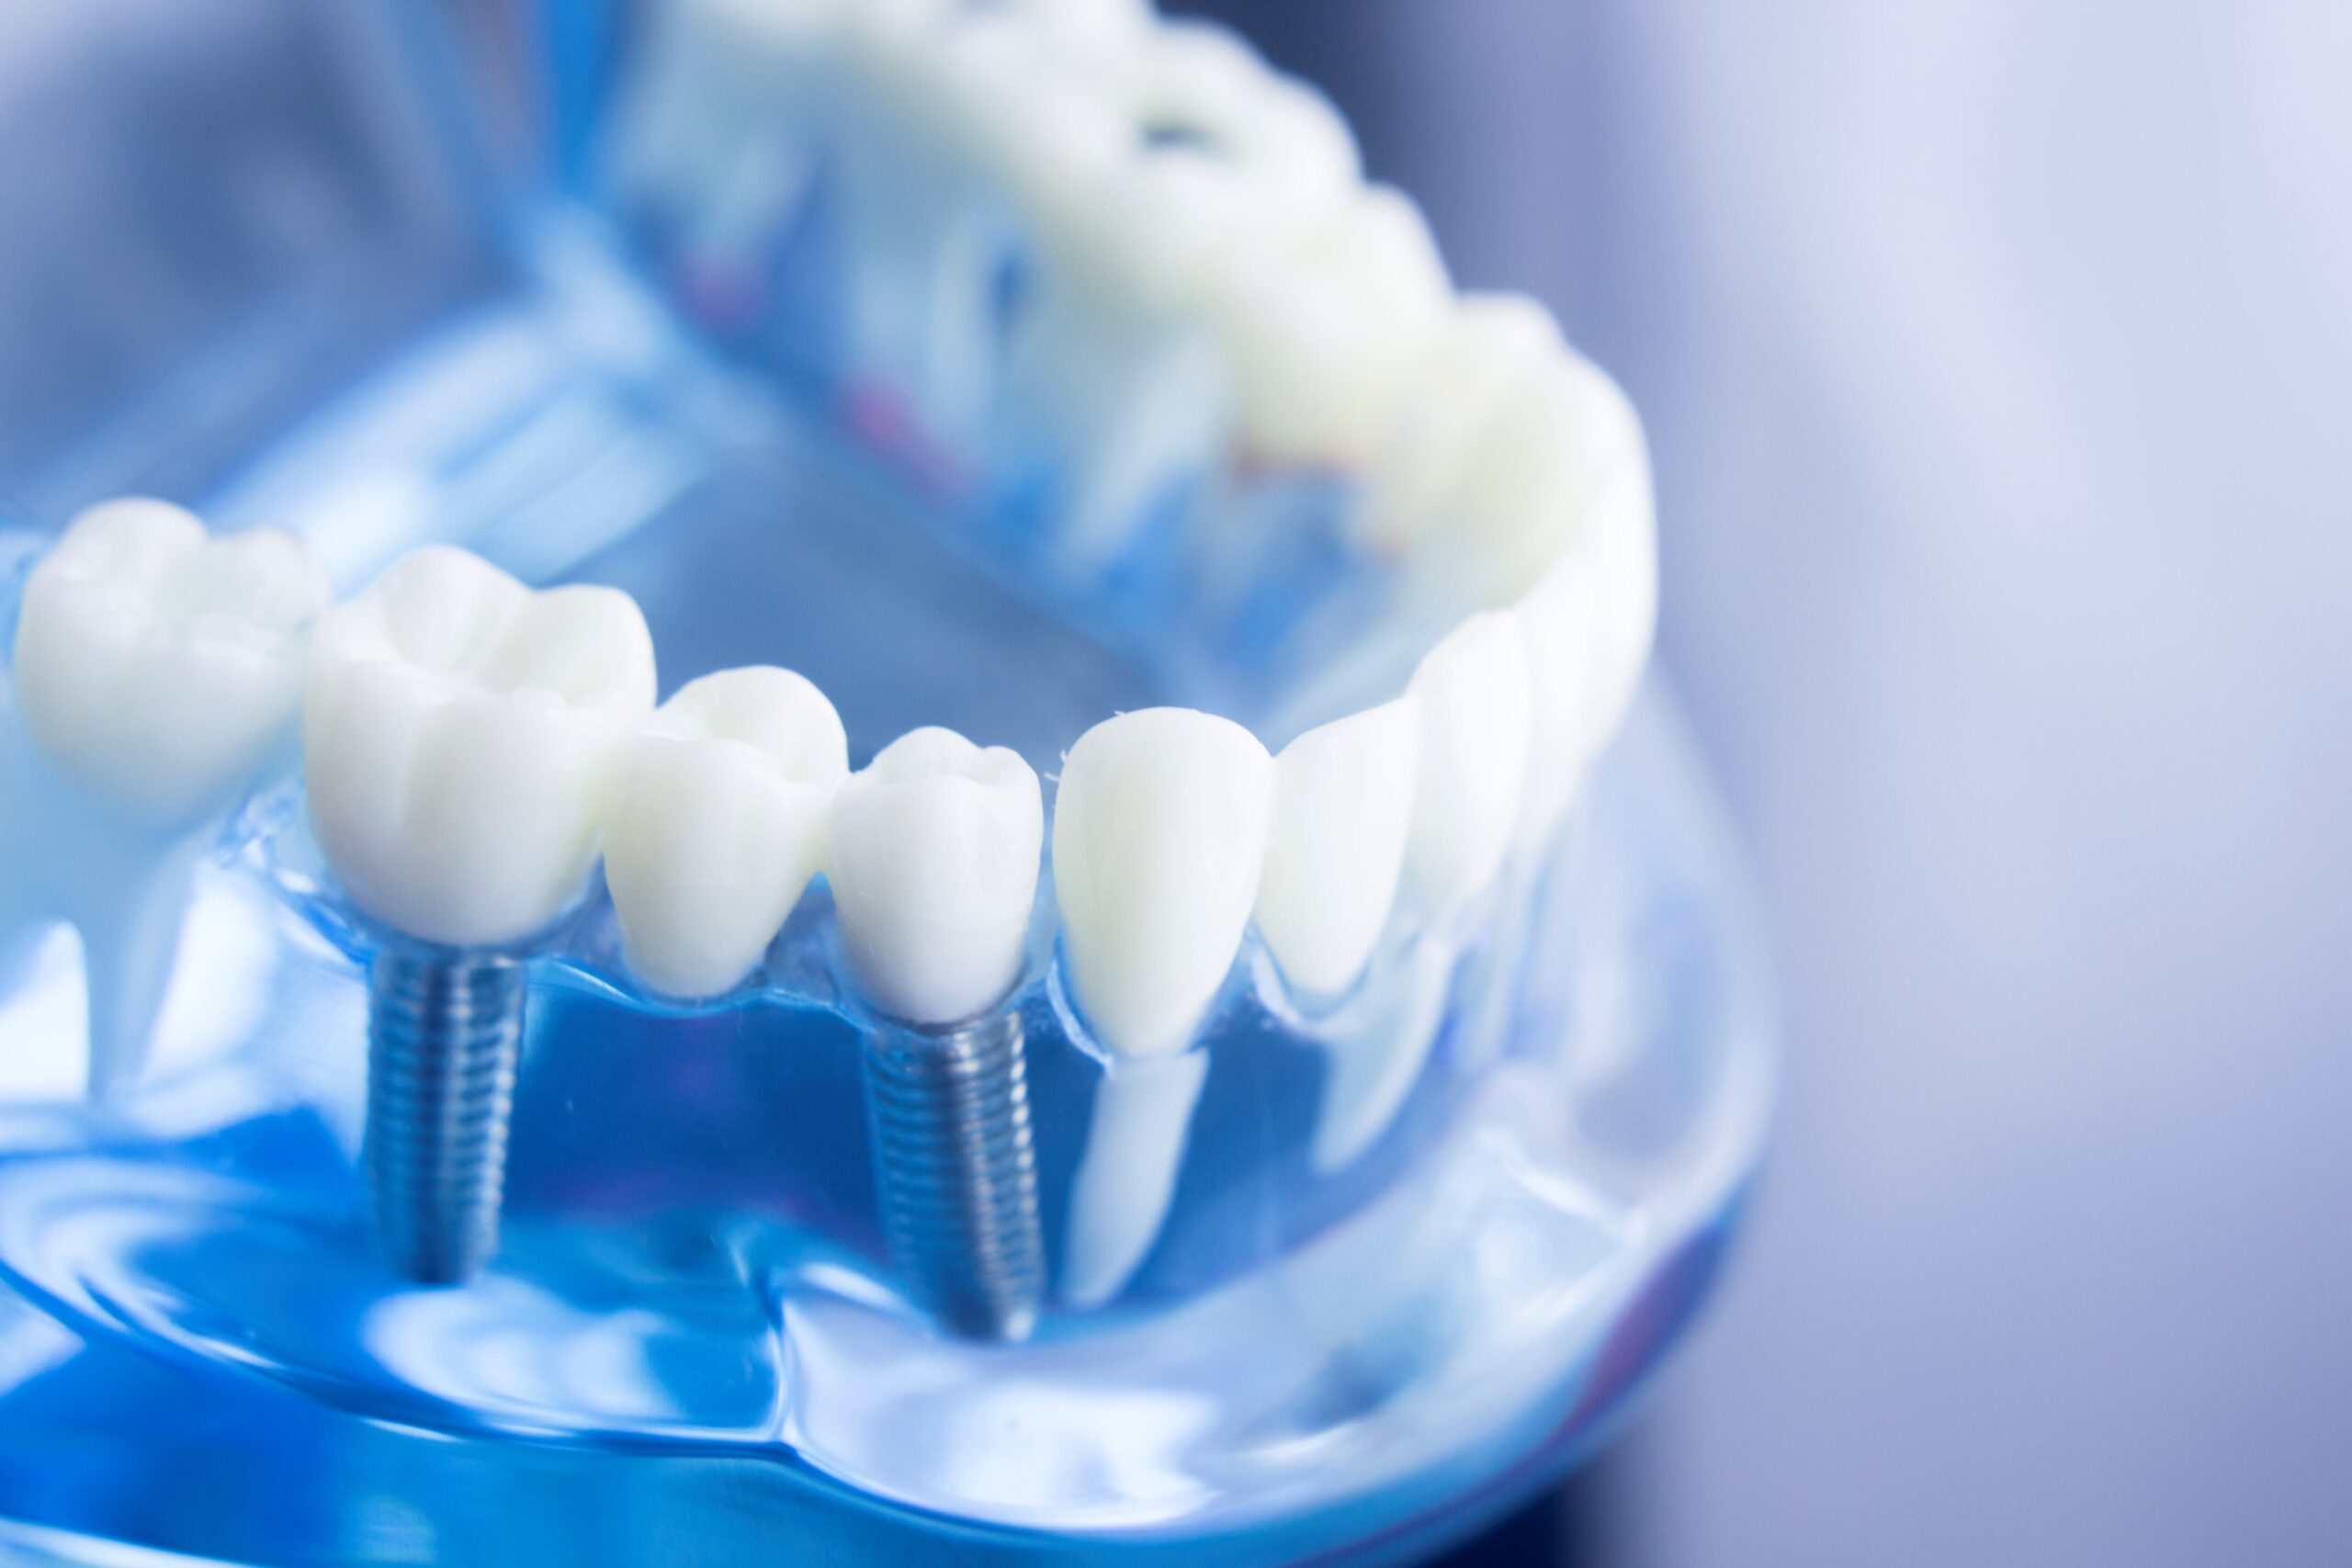 Close-up of a dental implant model showing a set of artificial teeth mounted on blue gums with visible screw bases for the implants.